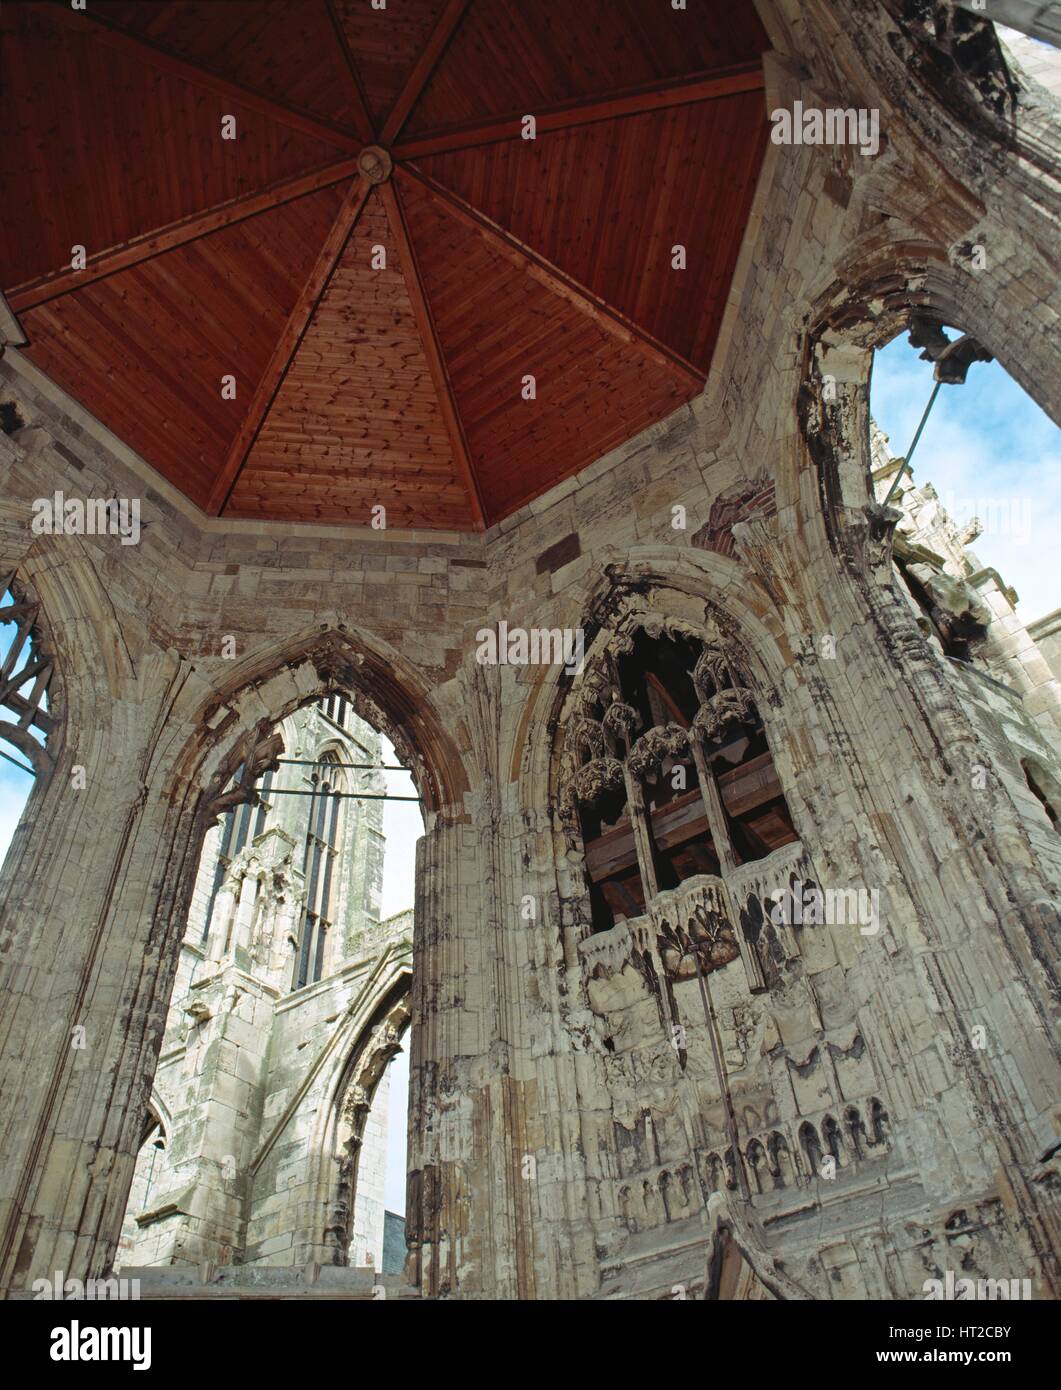 Howden Minster, Humberside, East Riding of Yorkshire, c2000s(?). Artist: Historic England Staff Photographer. Stock Photo